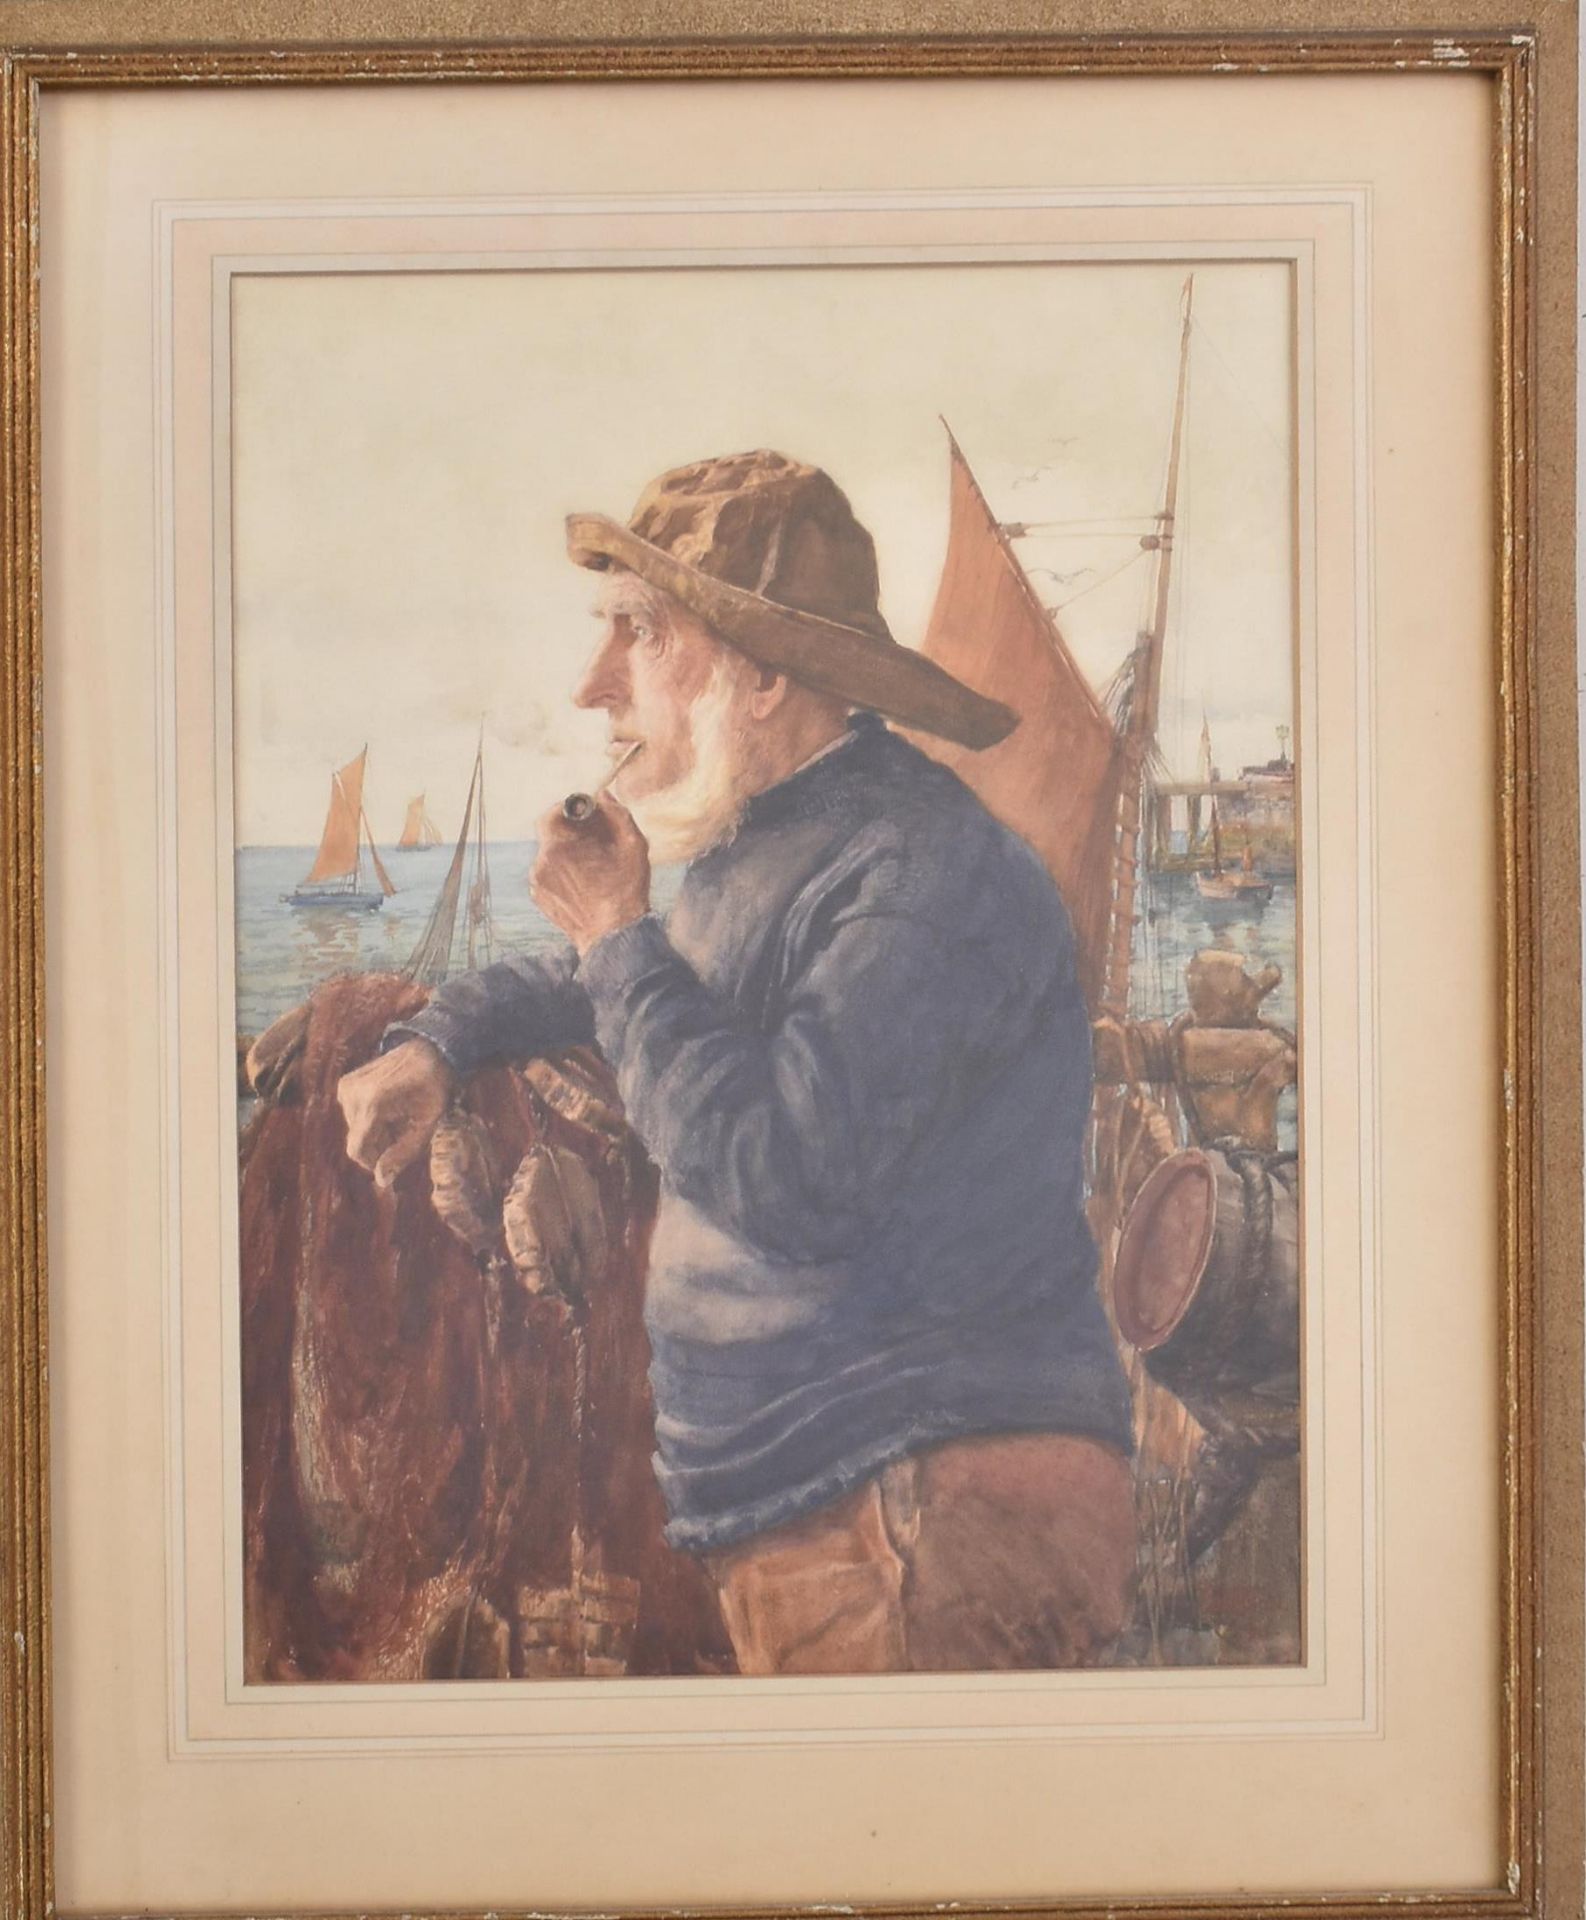 FREDERICK BRUTON (1883 - 1911) - THE OLD FISHERMAN - WATERCOLOUR - Image 2 of 5